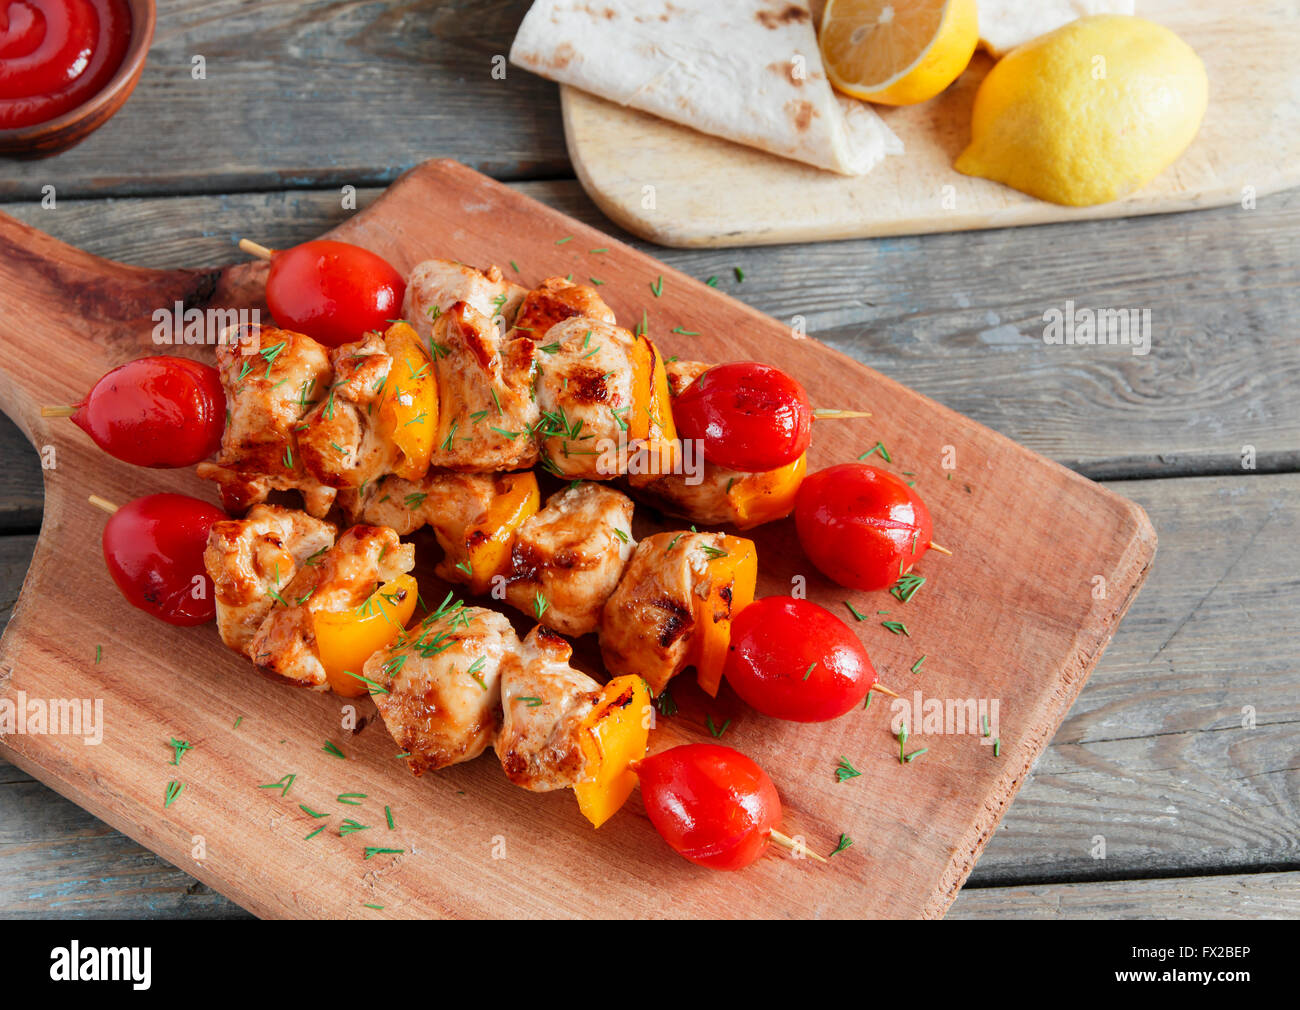 Chicken shish kebab with pepper tomato wooden skewer Stock Photo